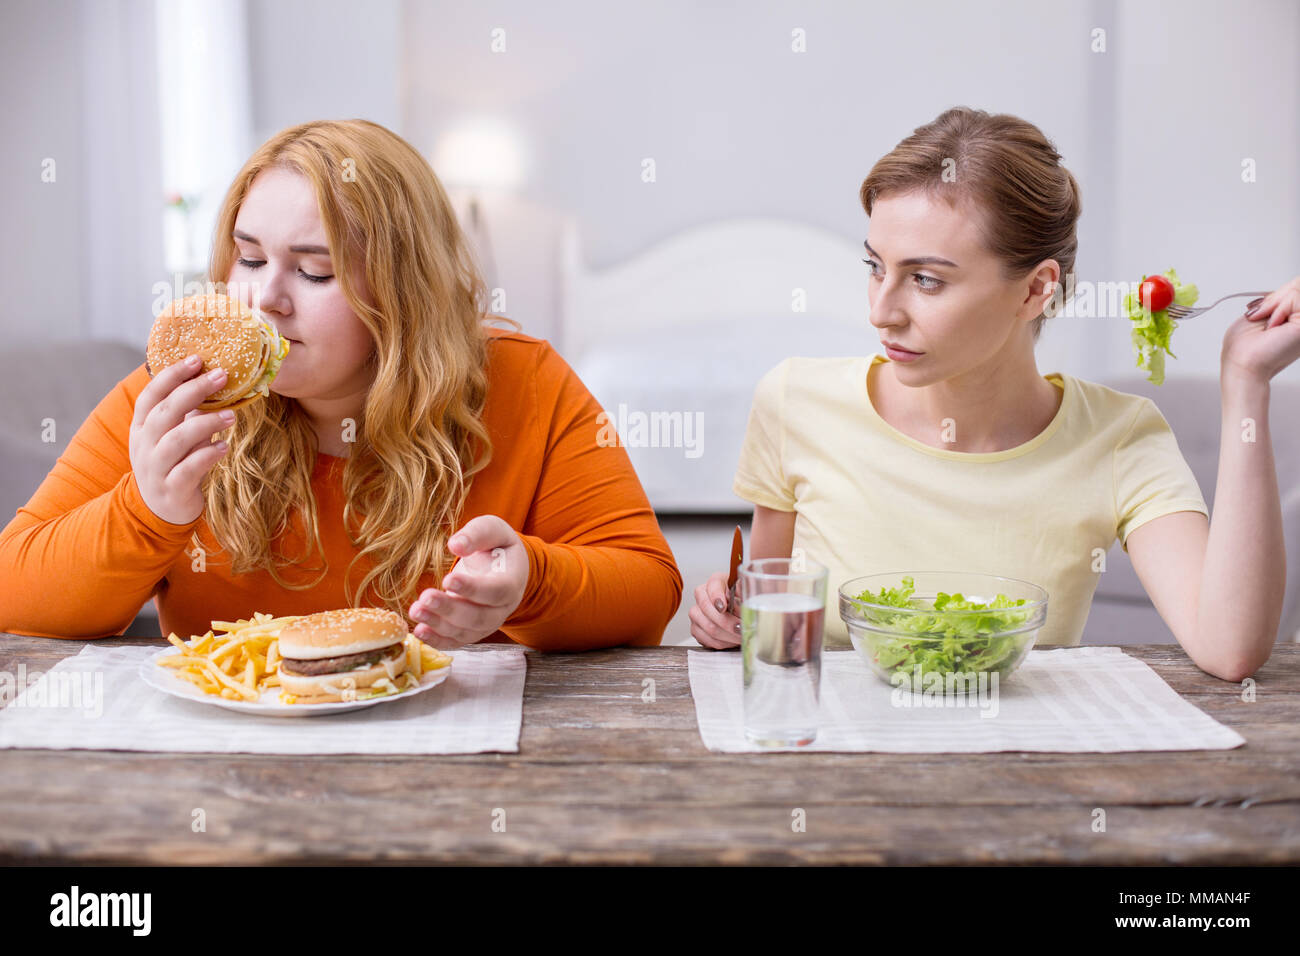 Cheerful plump woman having lunch with her friend Stock Photo